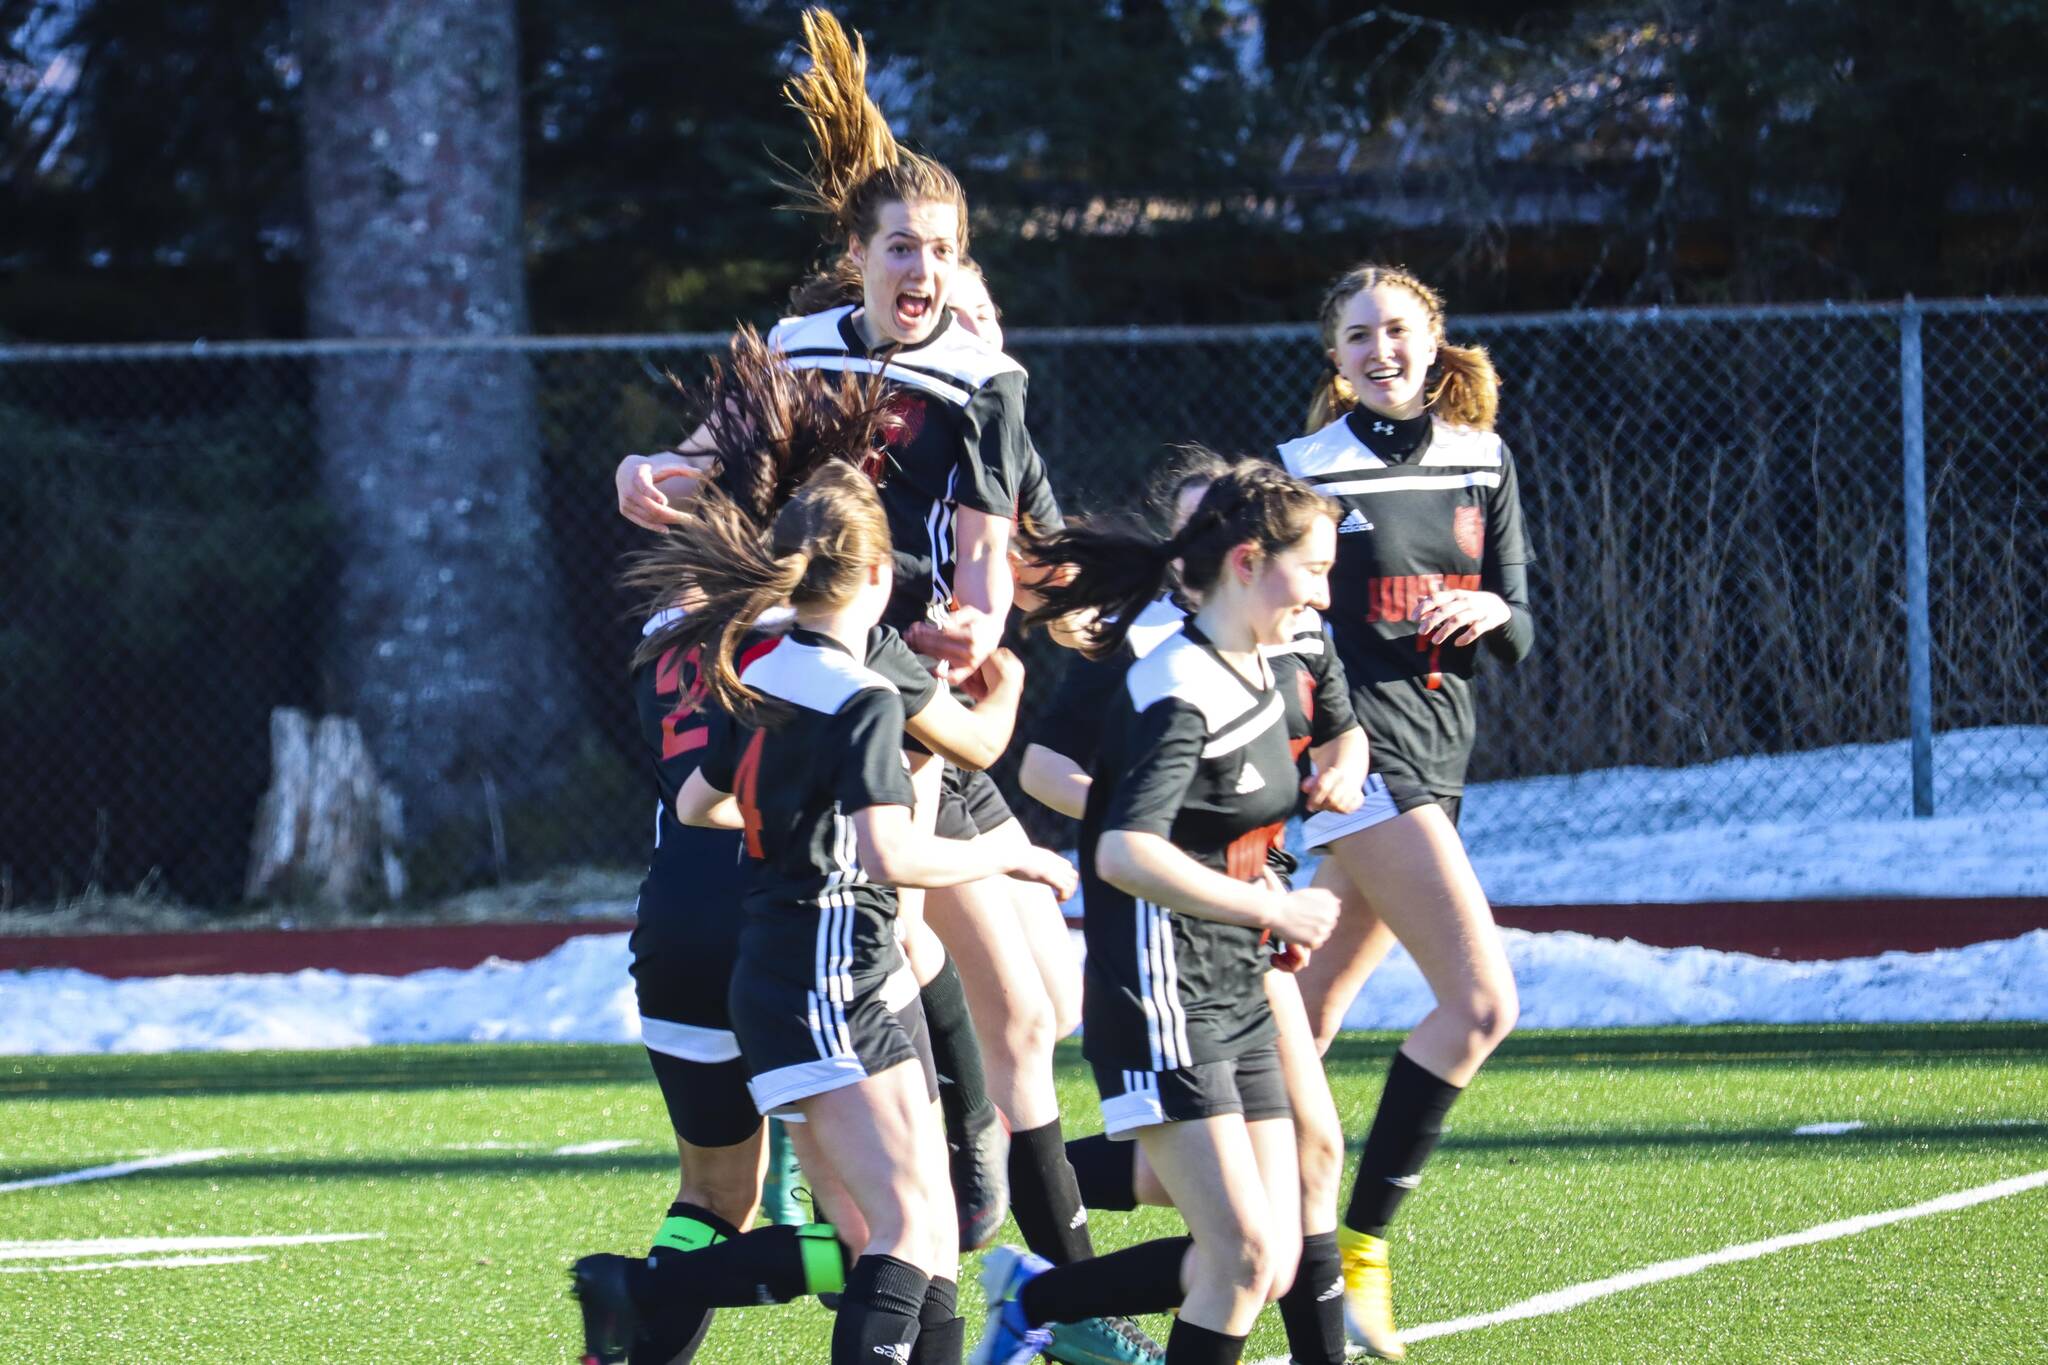 Michael S. Lockett / Juneau Empire 
JDHS forward Kyla Bentz, top center, celebrates with her team after scoring on TMHS during a game at Adair-Kennedy Memorial Park on April 12, 2022.